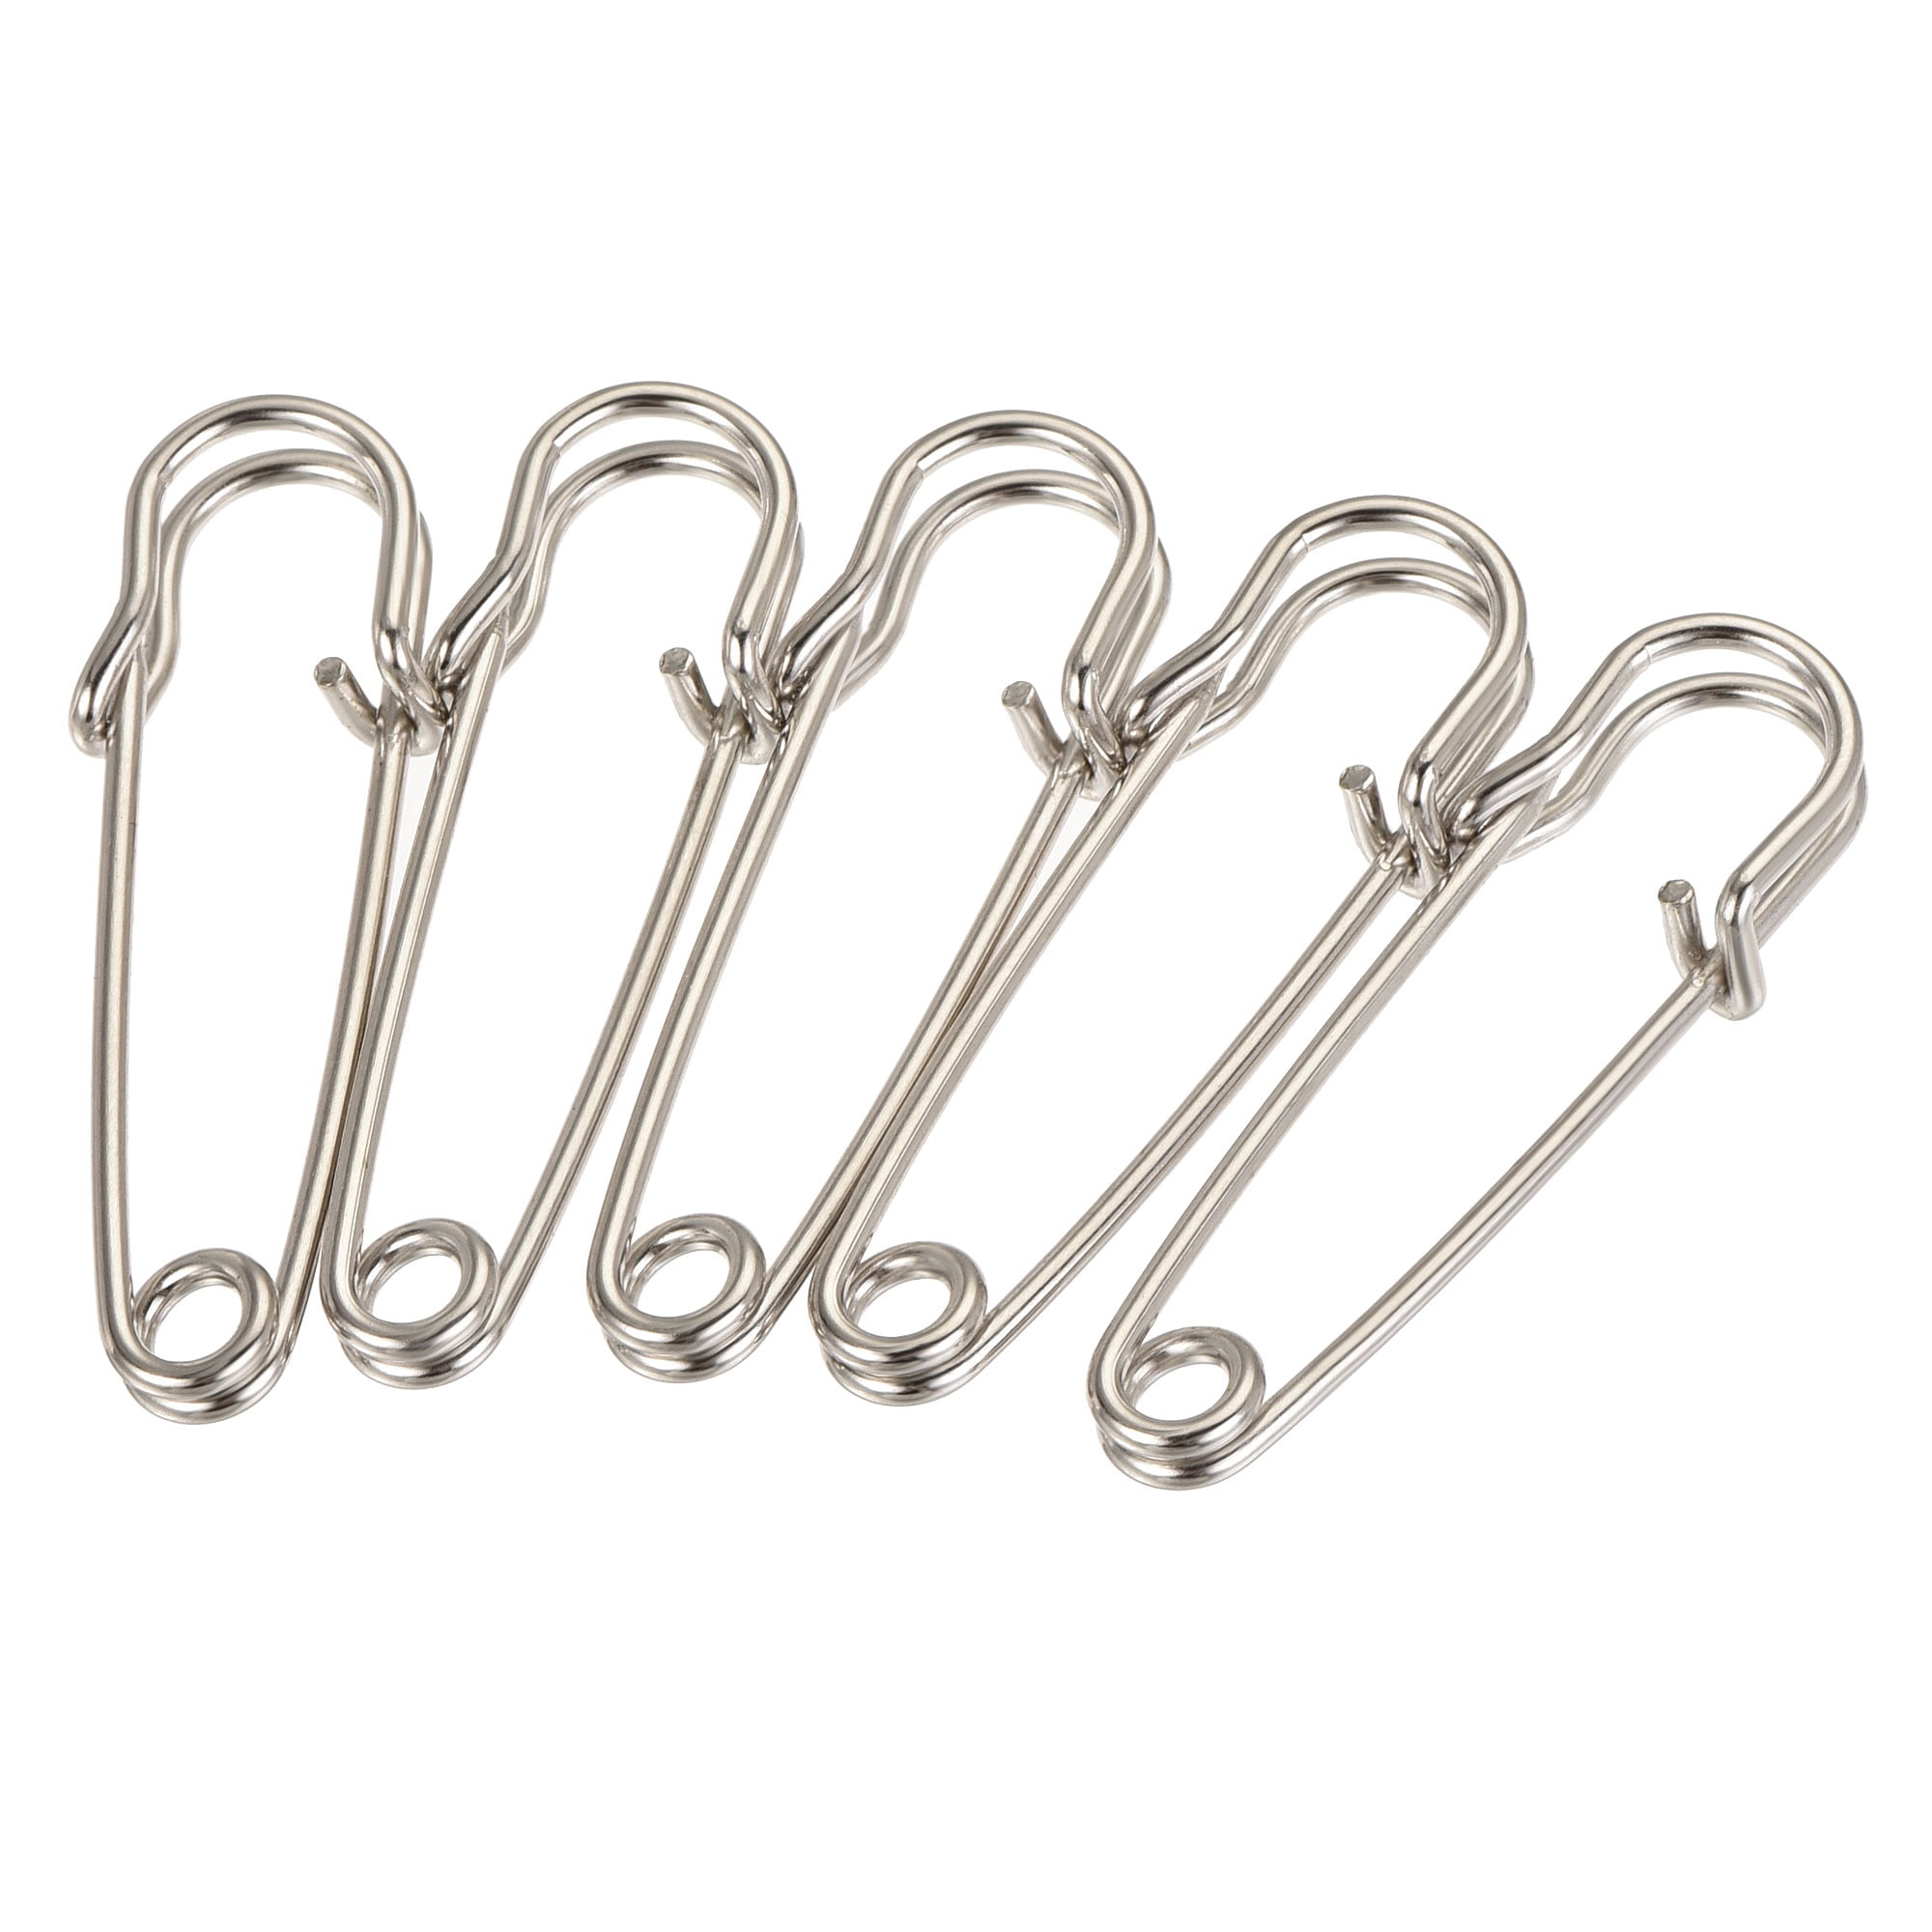 Uxcell 33mm/1.3 Inch Curved Safety Pins Metal Sewing Pins for Office Home  Silver Tone 200 Pack 